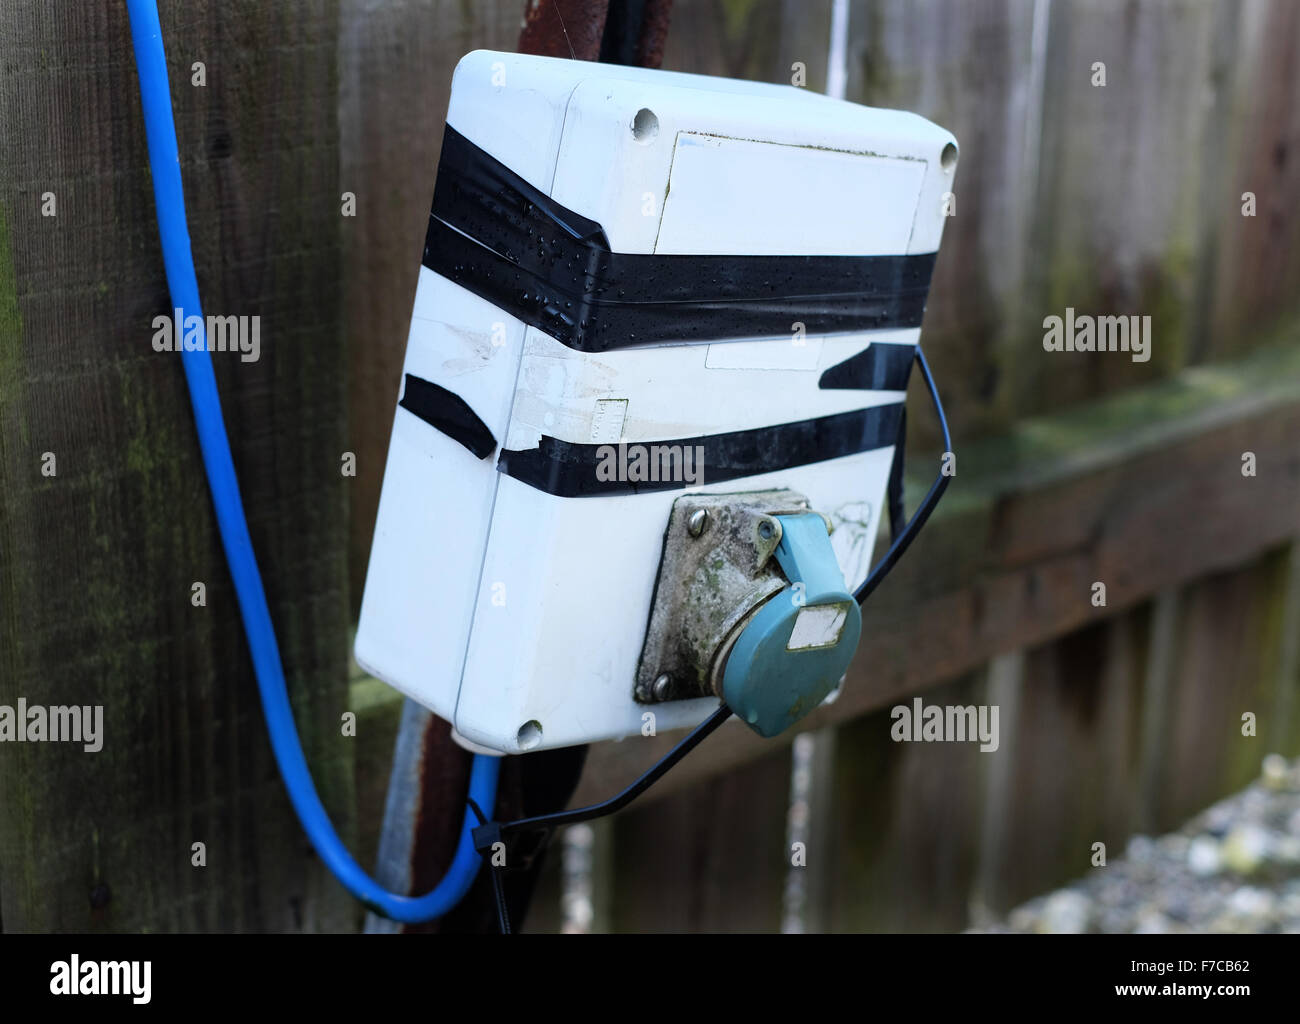 Damaged outdoor electrical supply point. Stock Photo